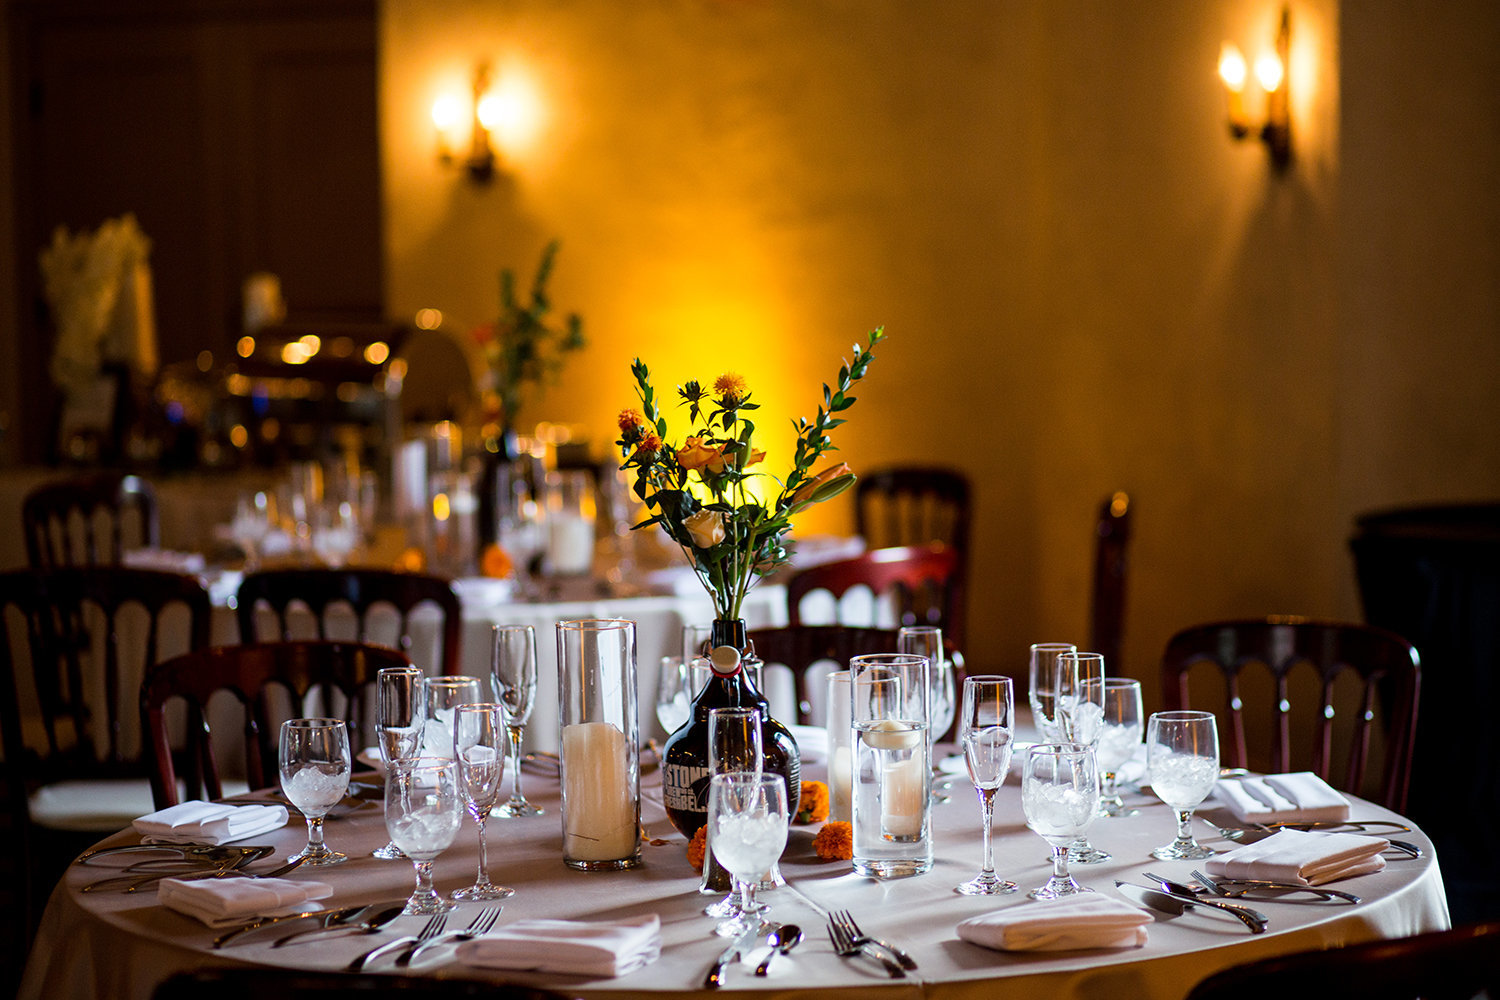 Warm amber uplighting set the perfect mood for this wedding table setting